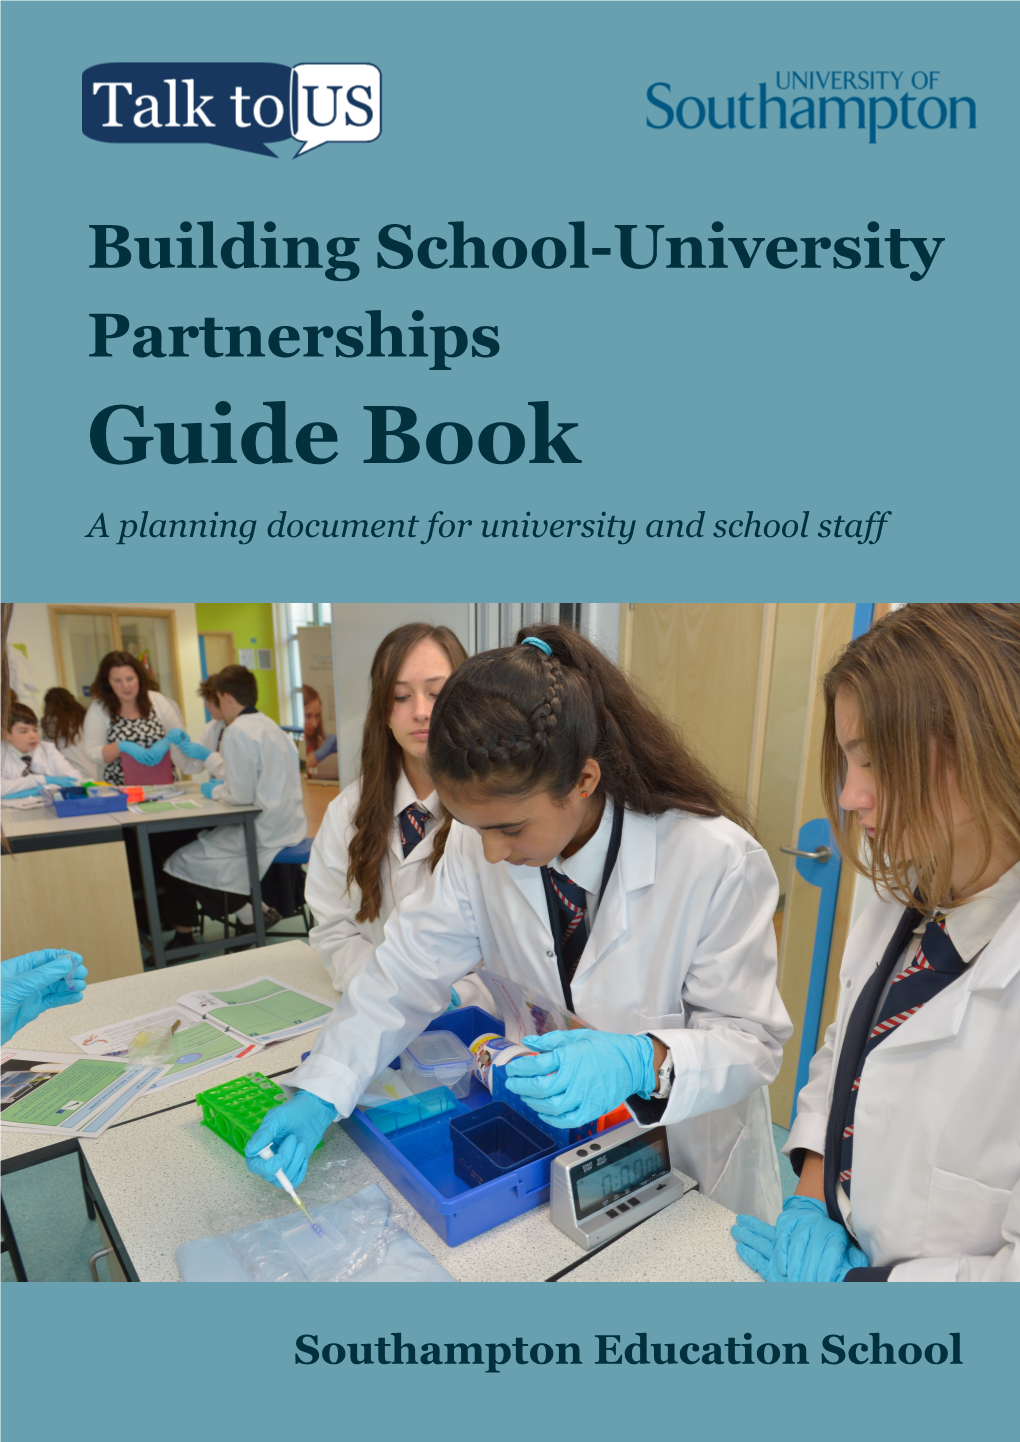 Guide Book a Planning Document for University and School Staff